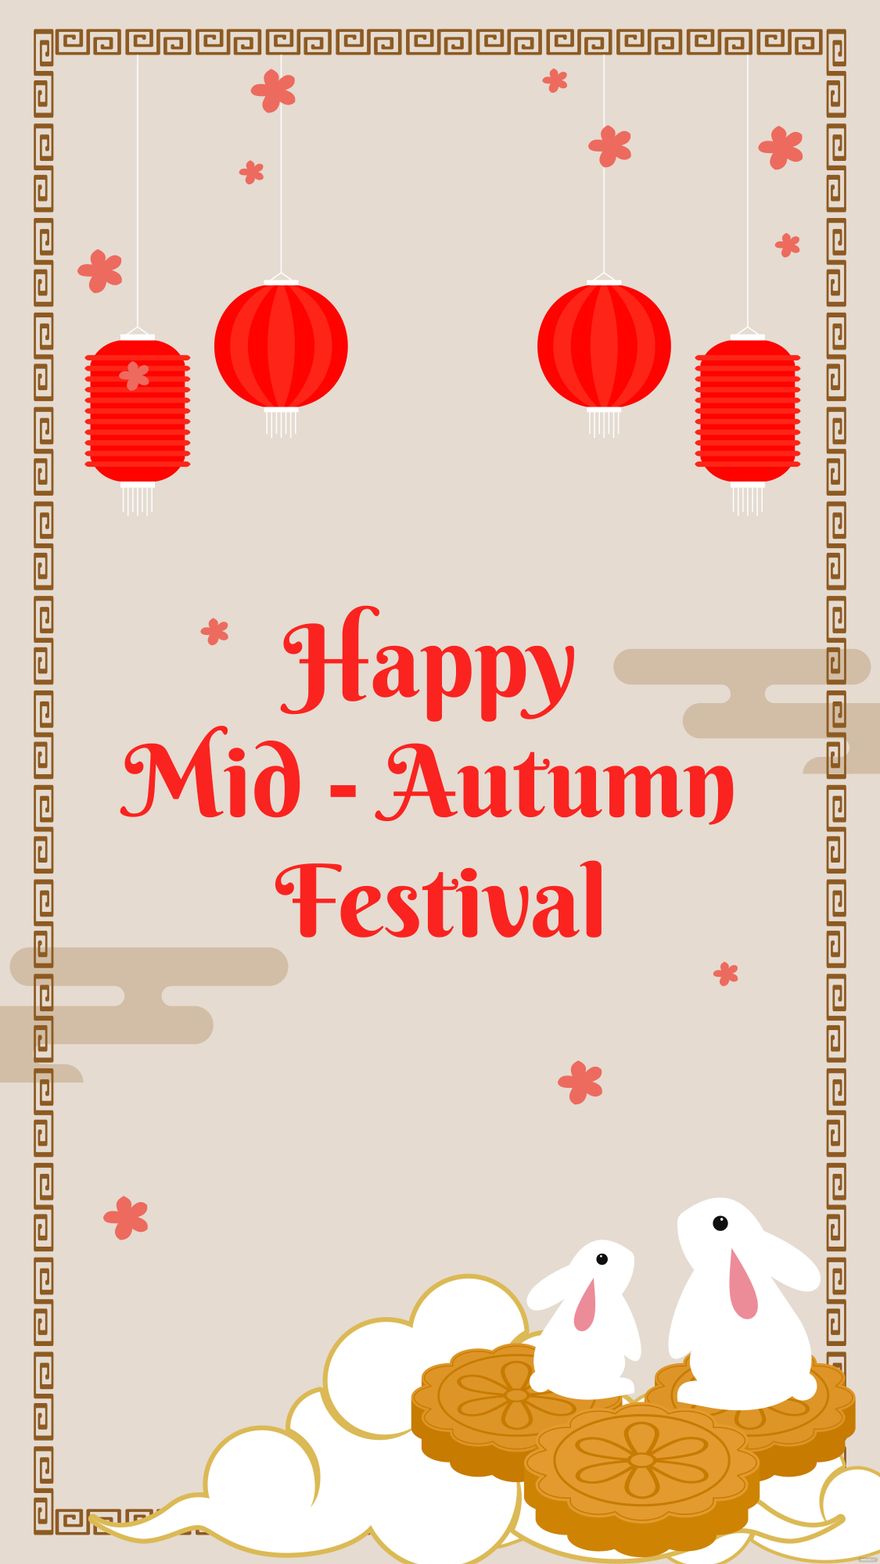 Mid-Autumn Festival iPhone background in PDF, Illustrator, PSD, EPS, SVG, JPG, PNG